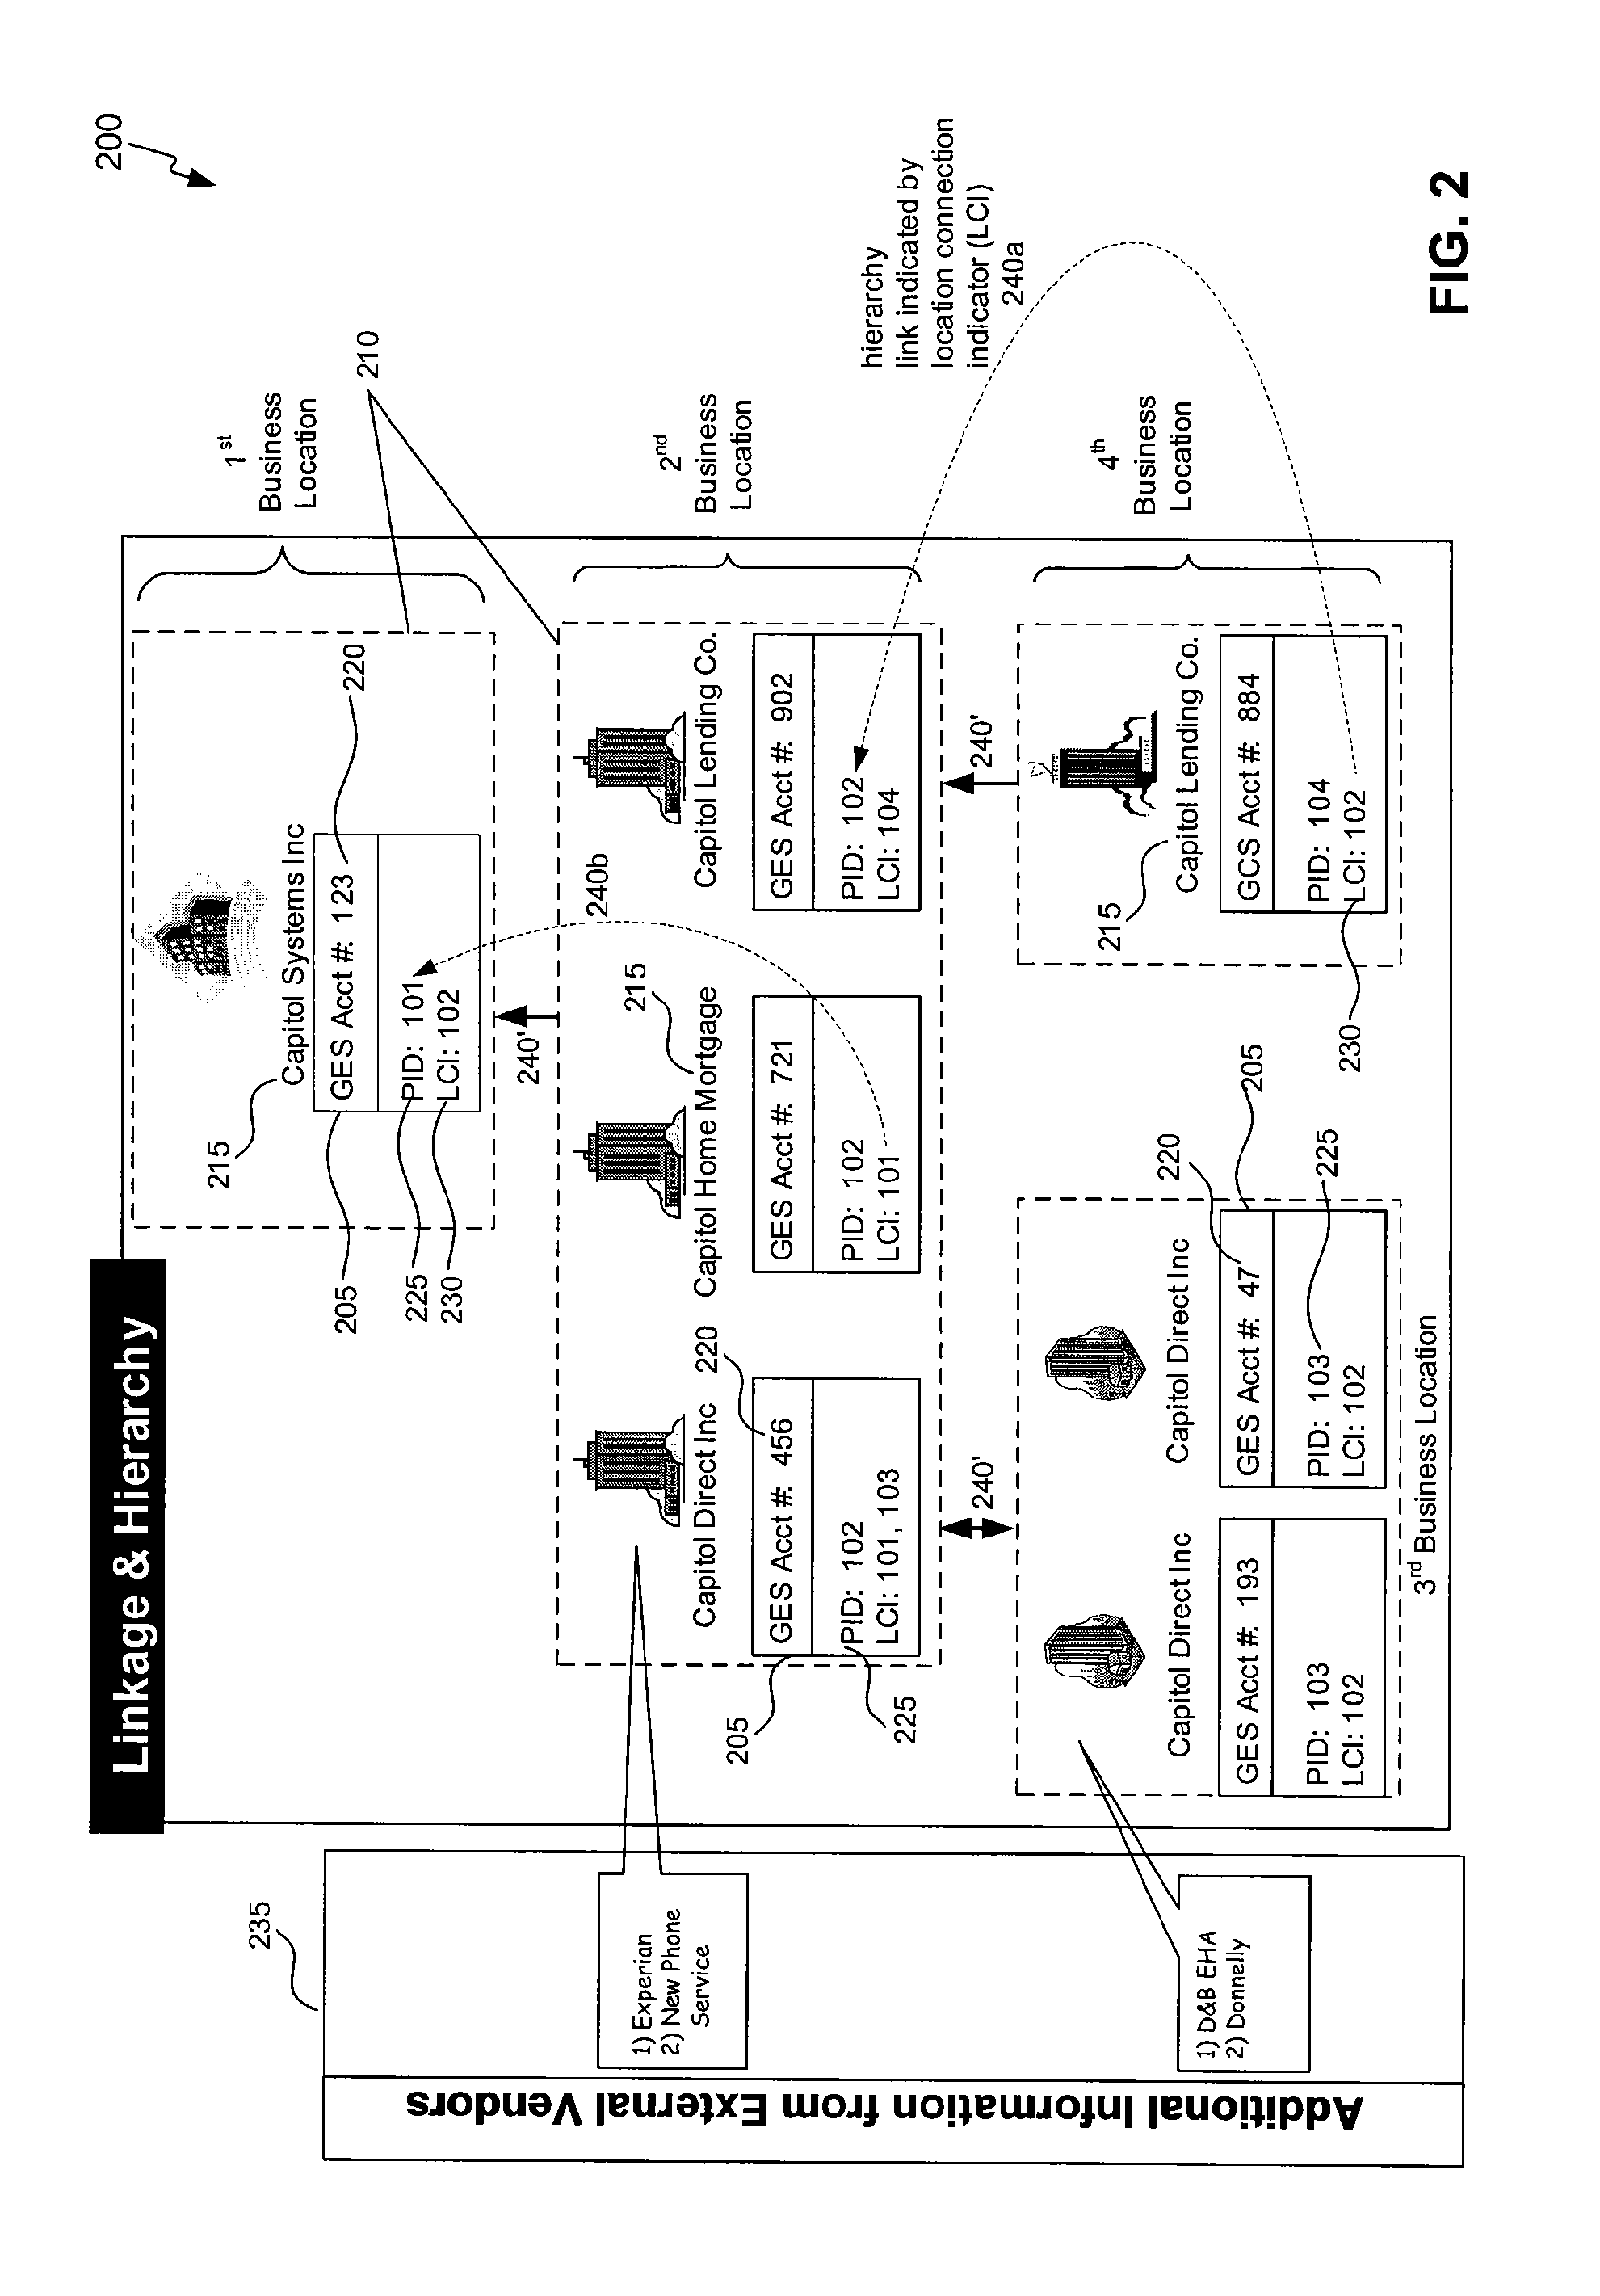 Method, system, and computer program product for customer linking and identification capability for institutions